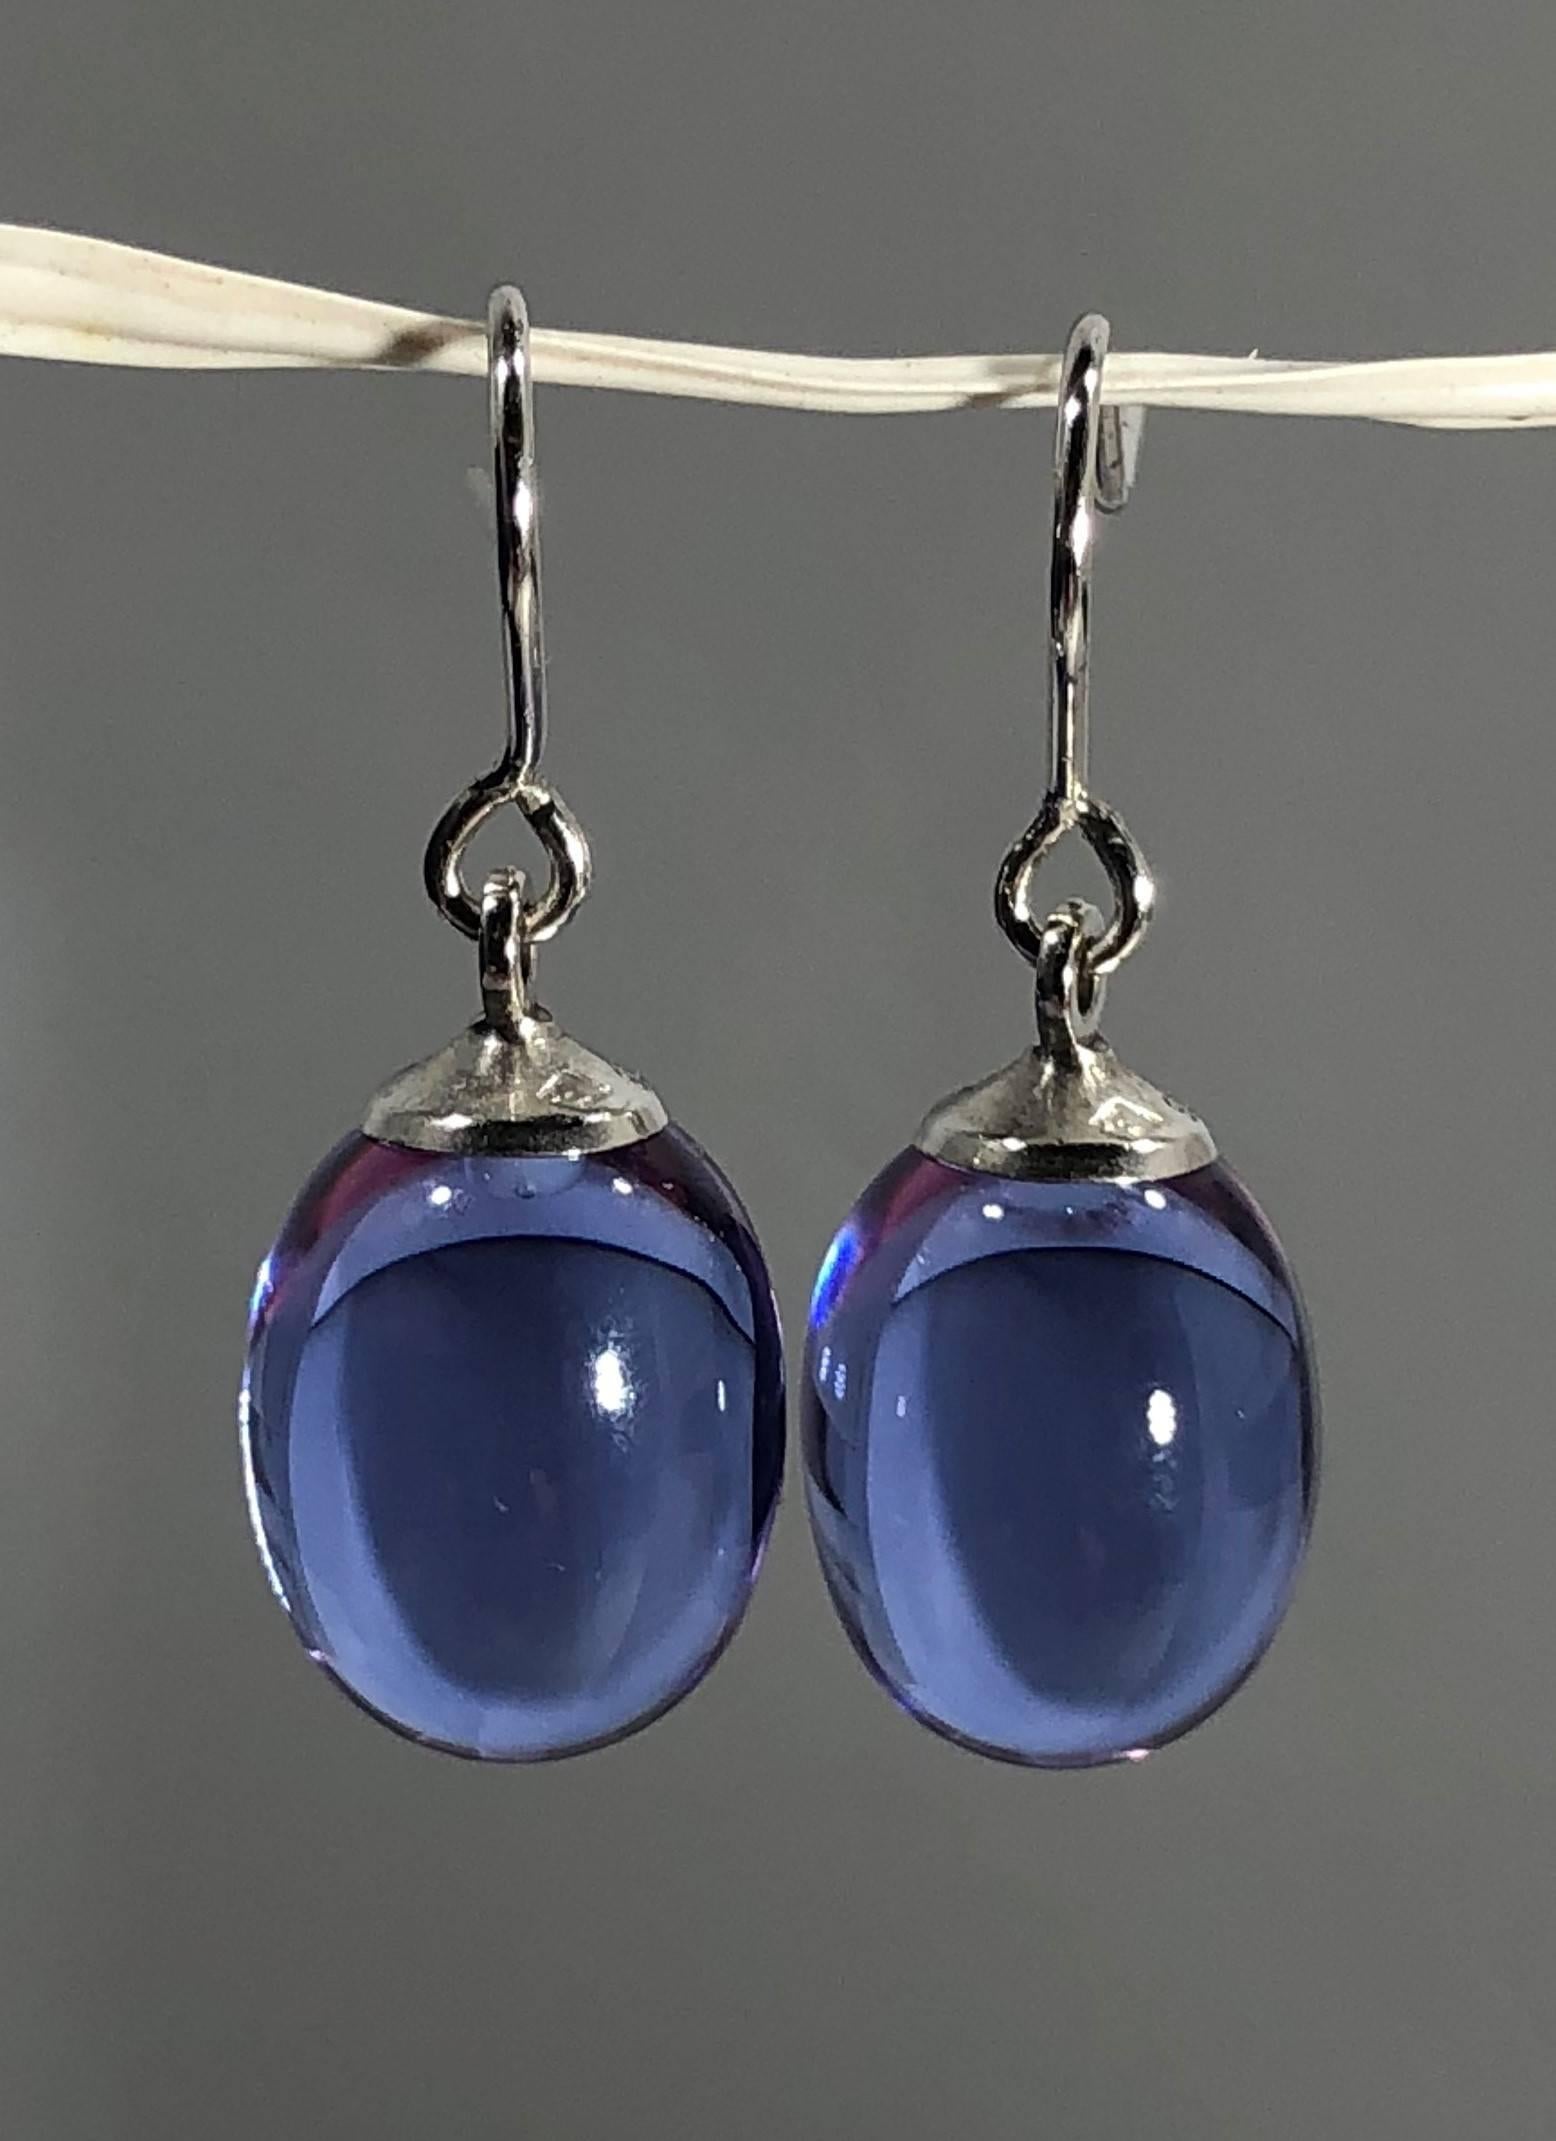 Modern Baccarat Crystal and Sterling Silver Blue Irridescent Drop Earrings